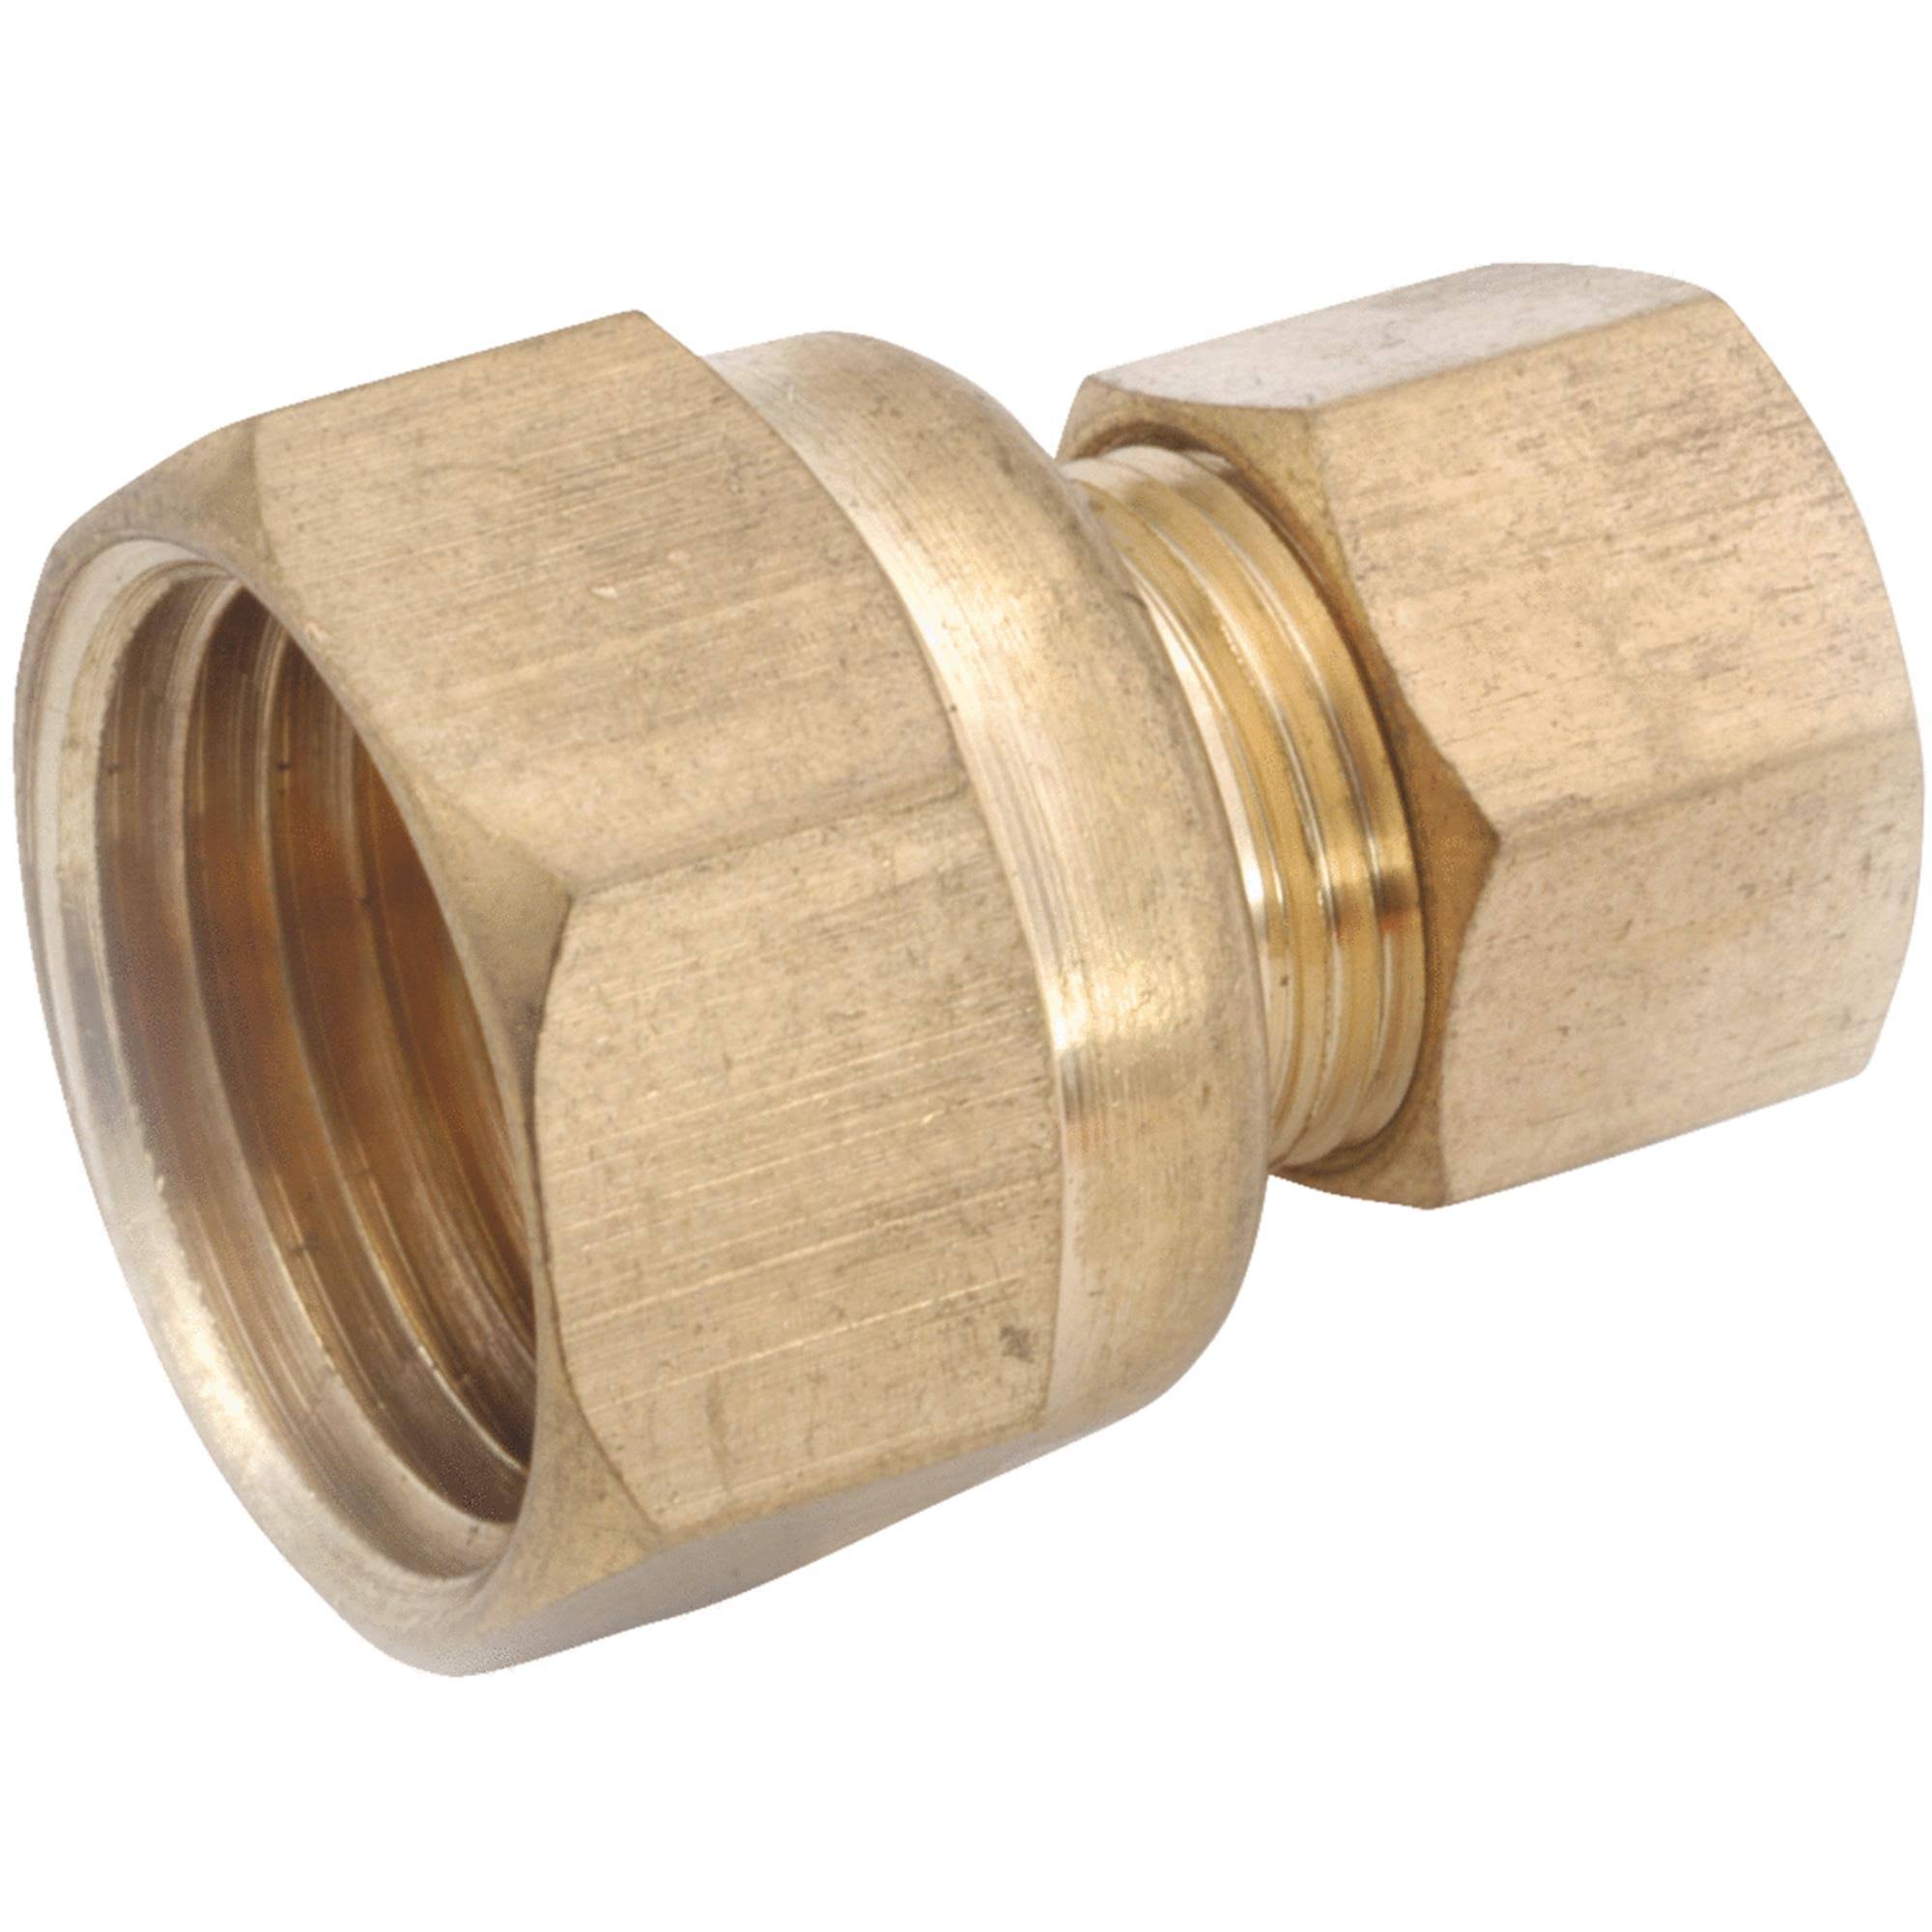 Anderson Metals Corp 750066-1012 Brass Adapter - 5/8"x3/4"